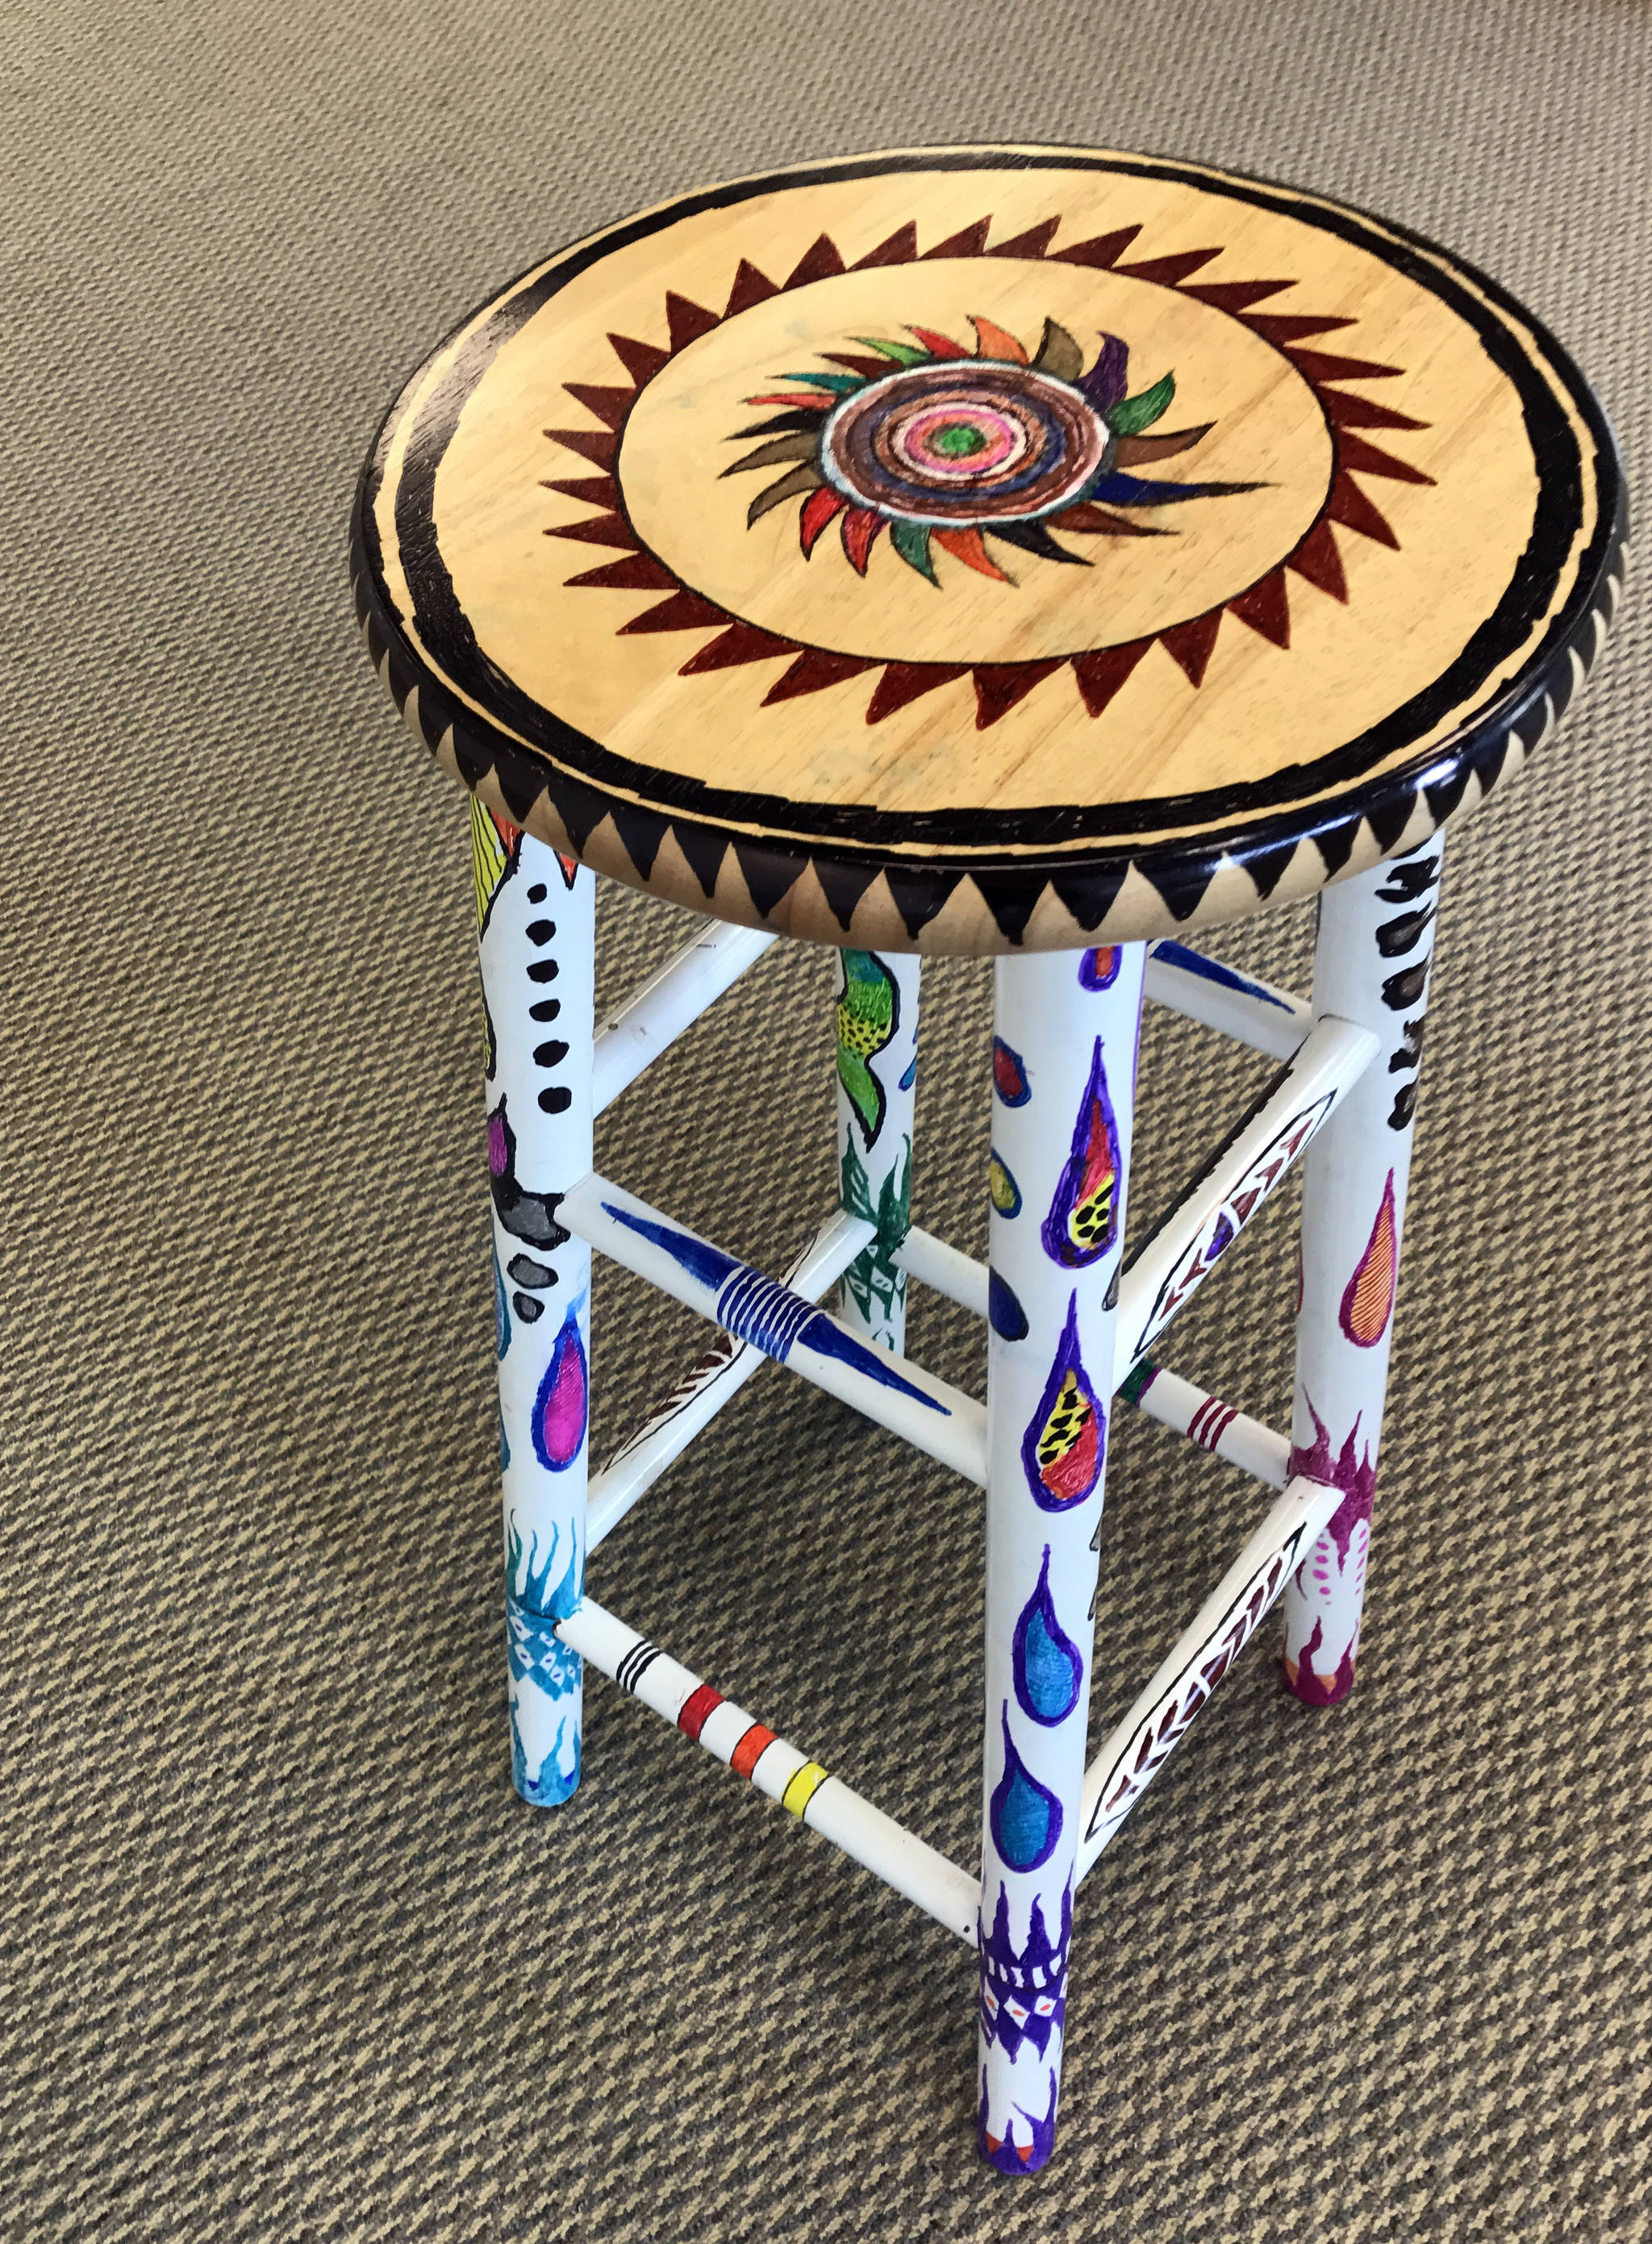 Robert Range of Kenai donated a decorated stool to be auctioned off at the Kenai Fine Art Center’s Annual Harvest Auction, to be held September 30, 2017 in Kenai, Alaska. The stool was created using permanent markers. (Photo by Kat Sorensen/Peninsula Clarion)